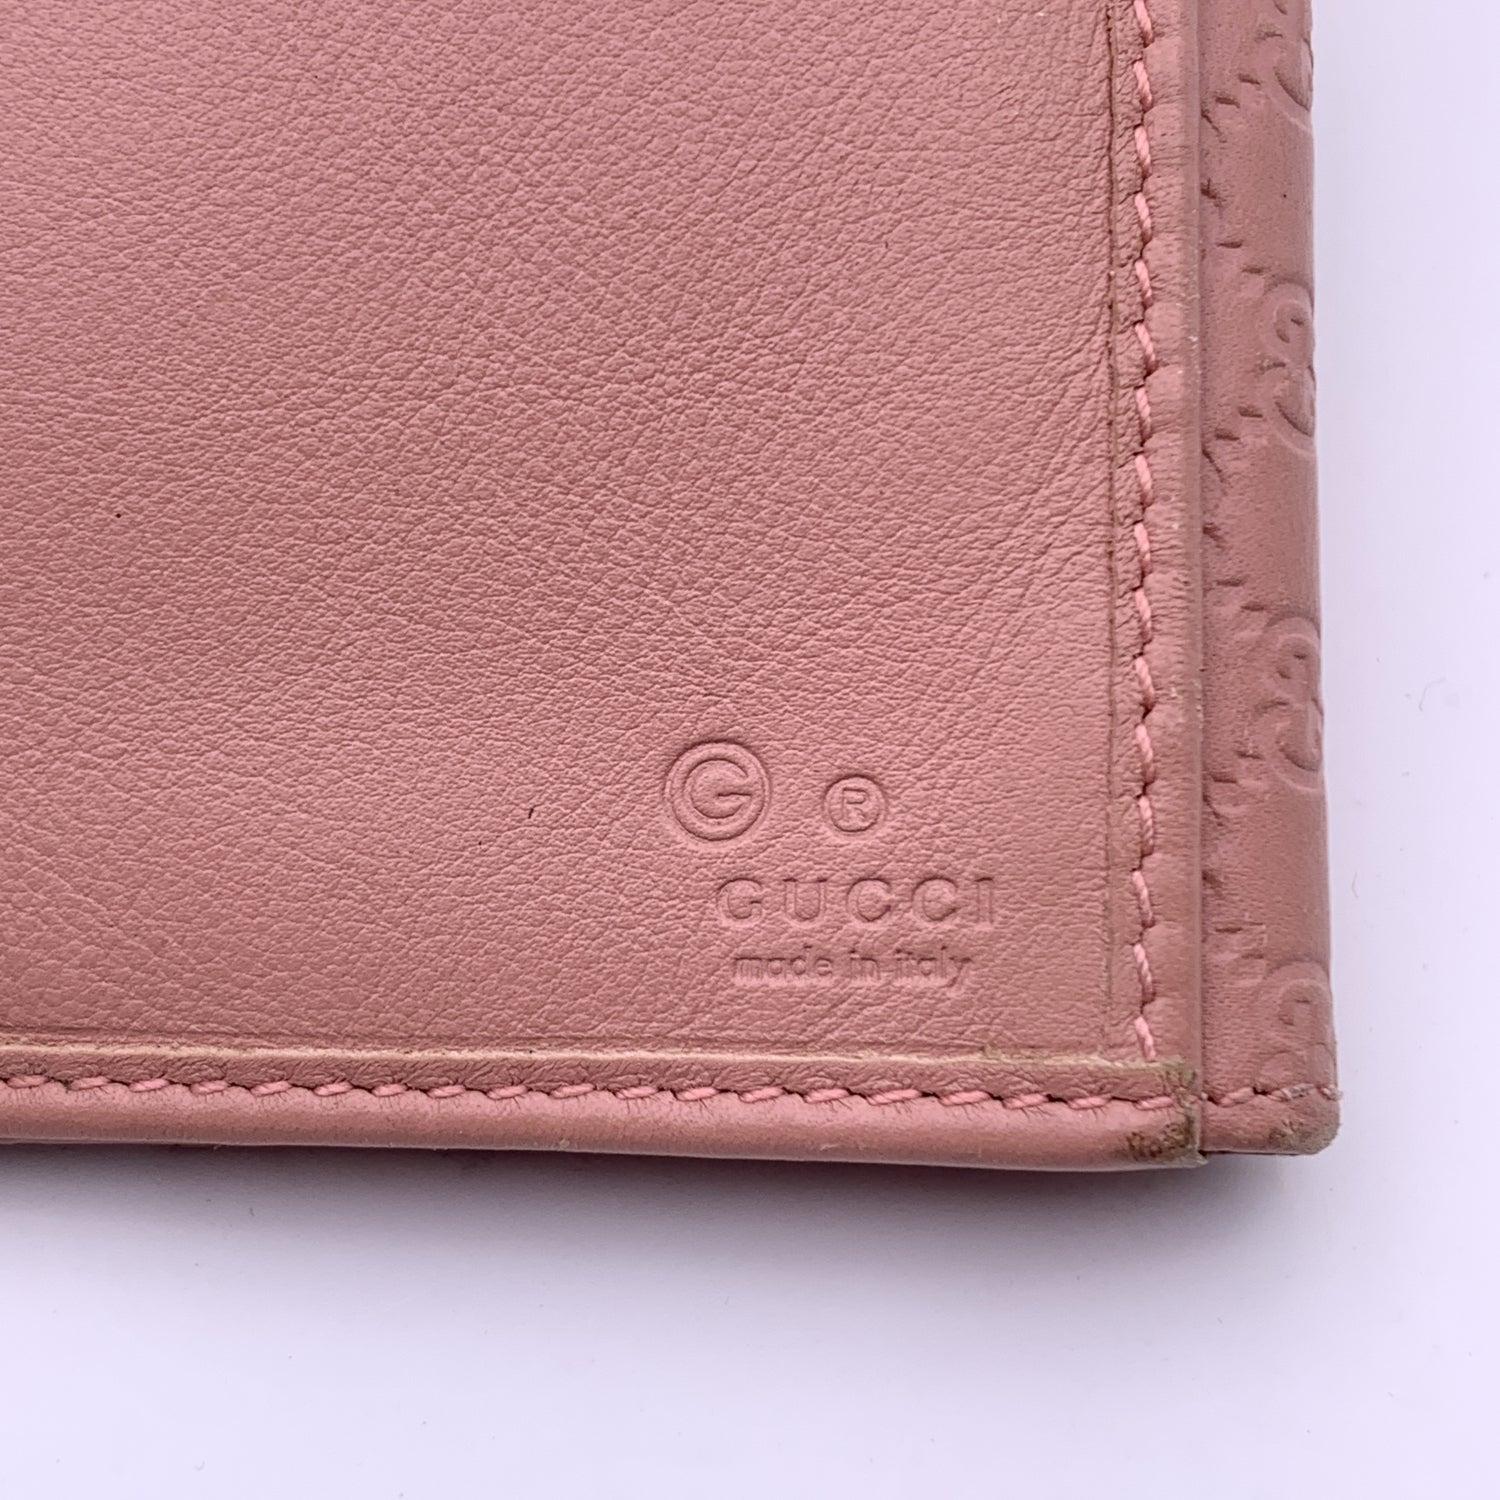 Gucci Pink Microguccissima Leather Continental Long Wallet 3